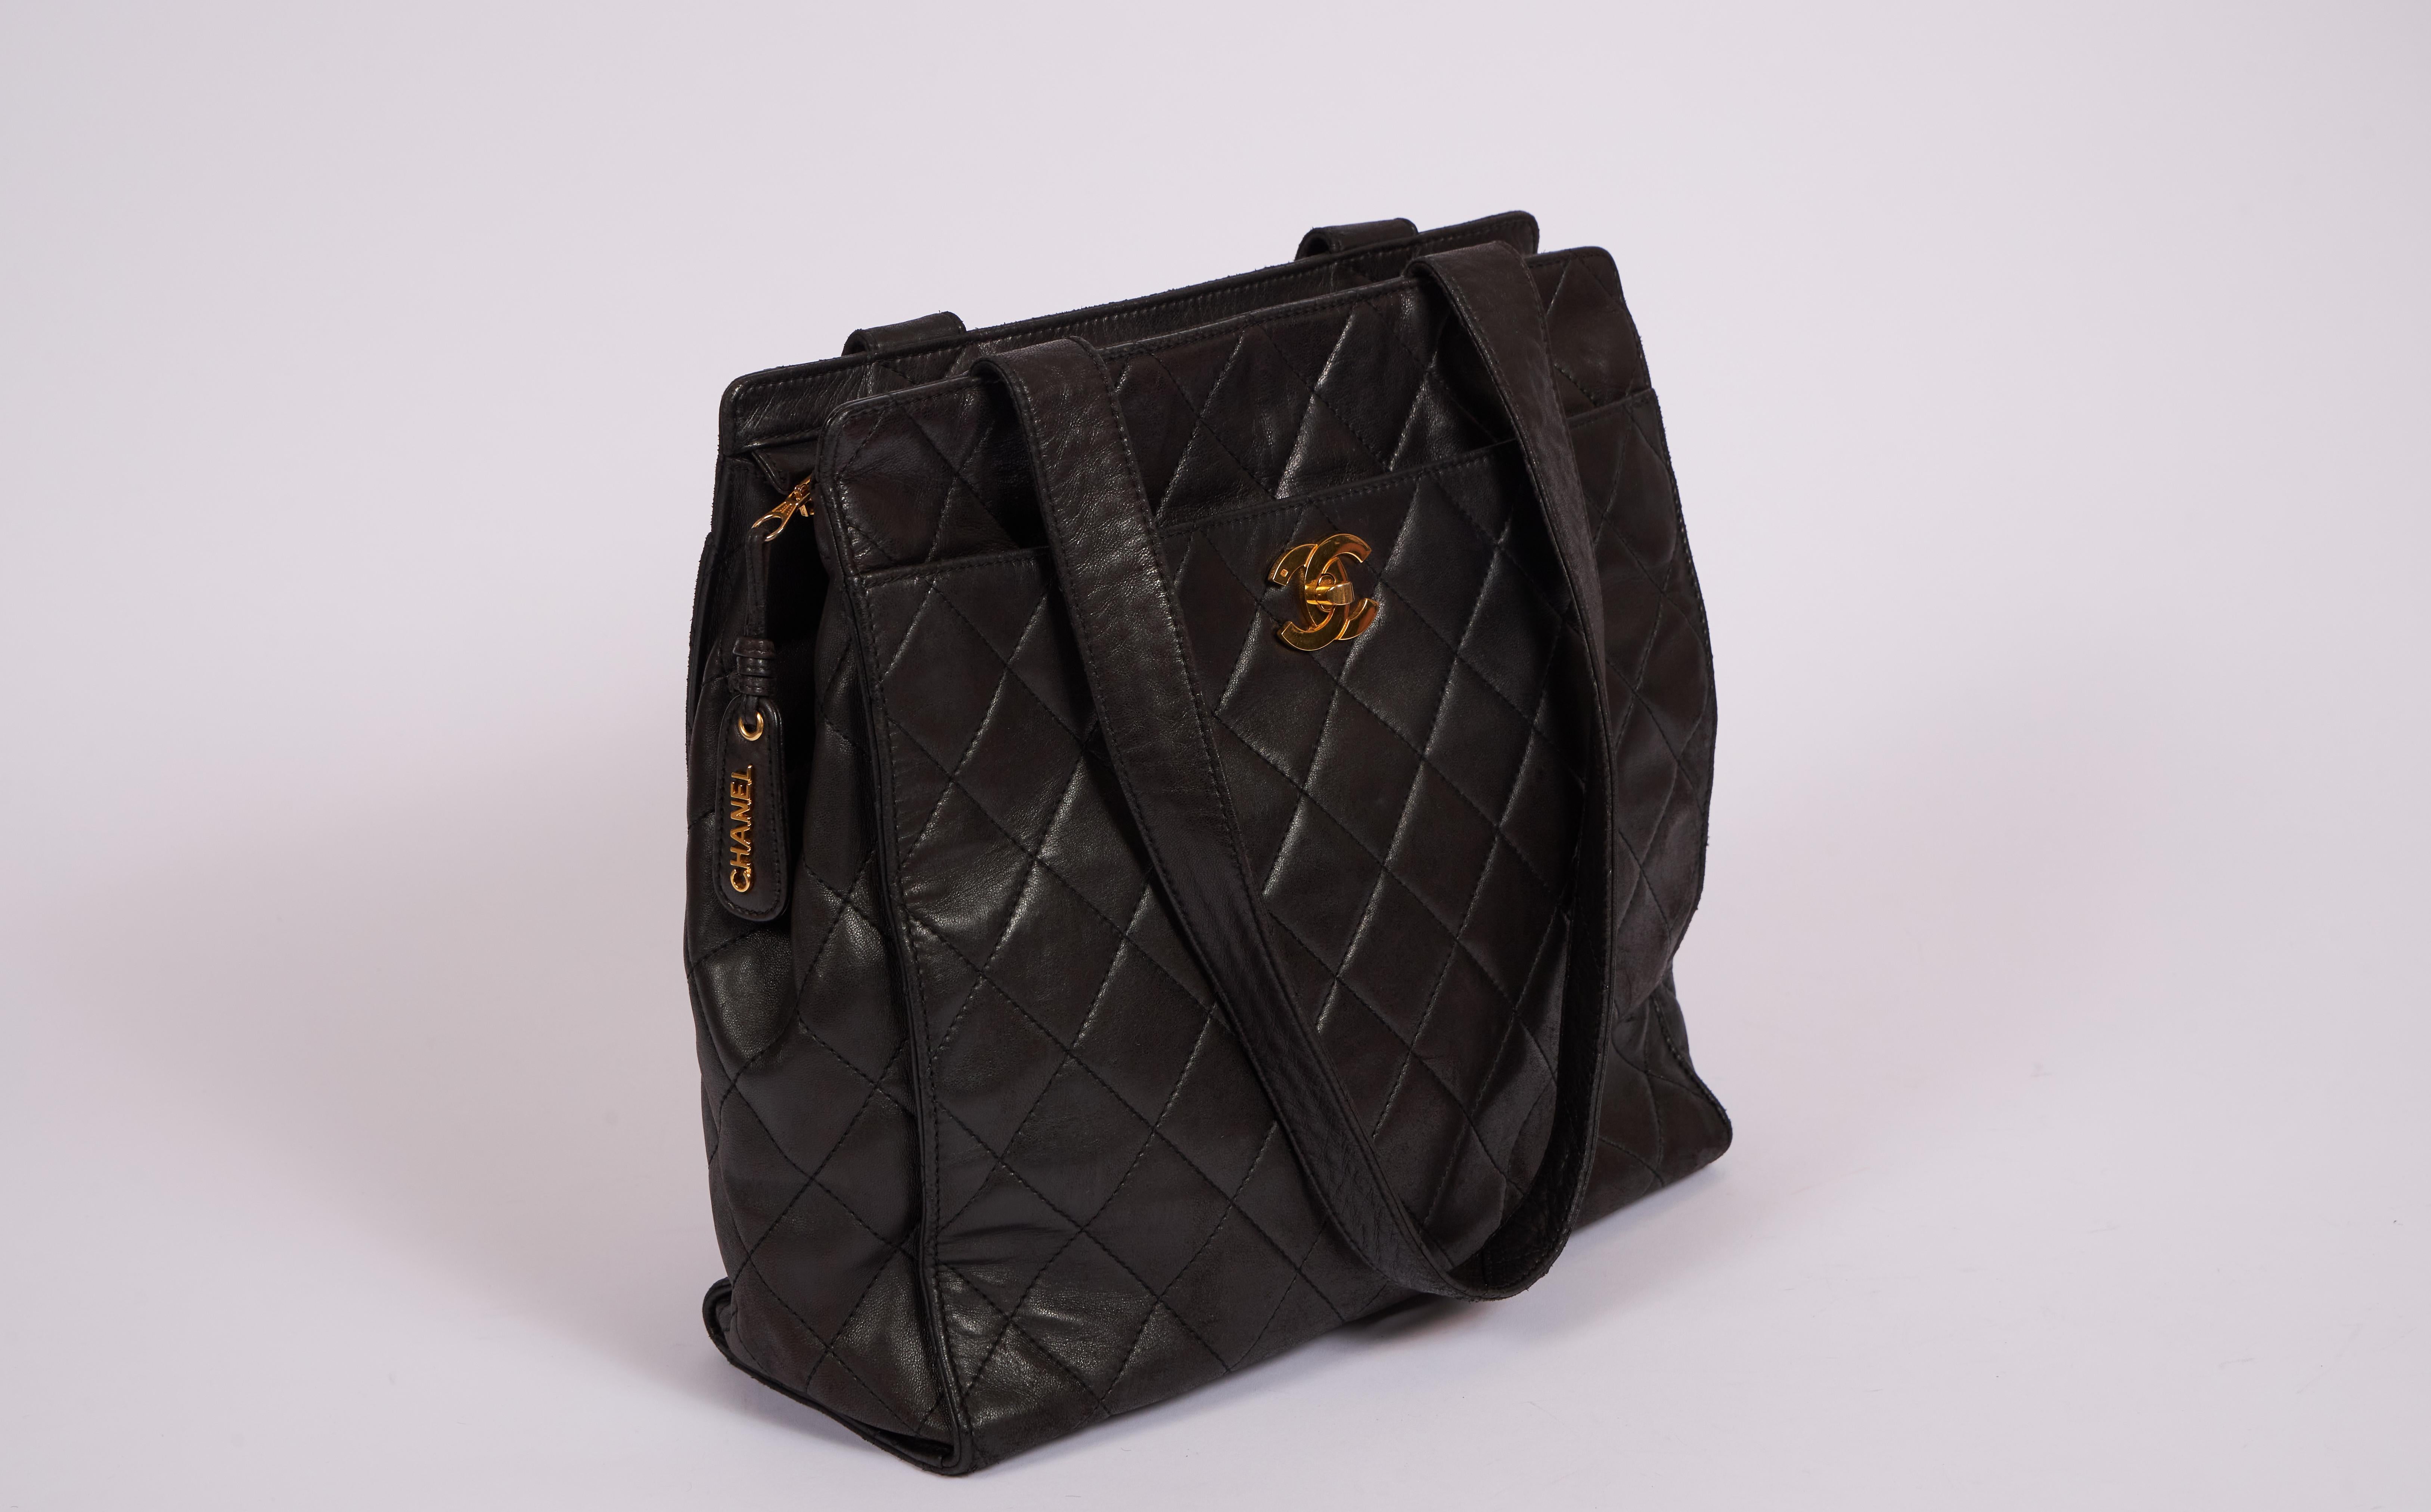 Chanel vintage black leather quilted large shoulder tote with multiple compartments. Handle drop 12